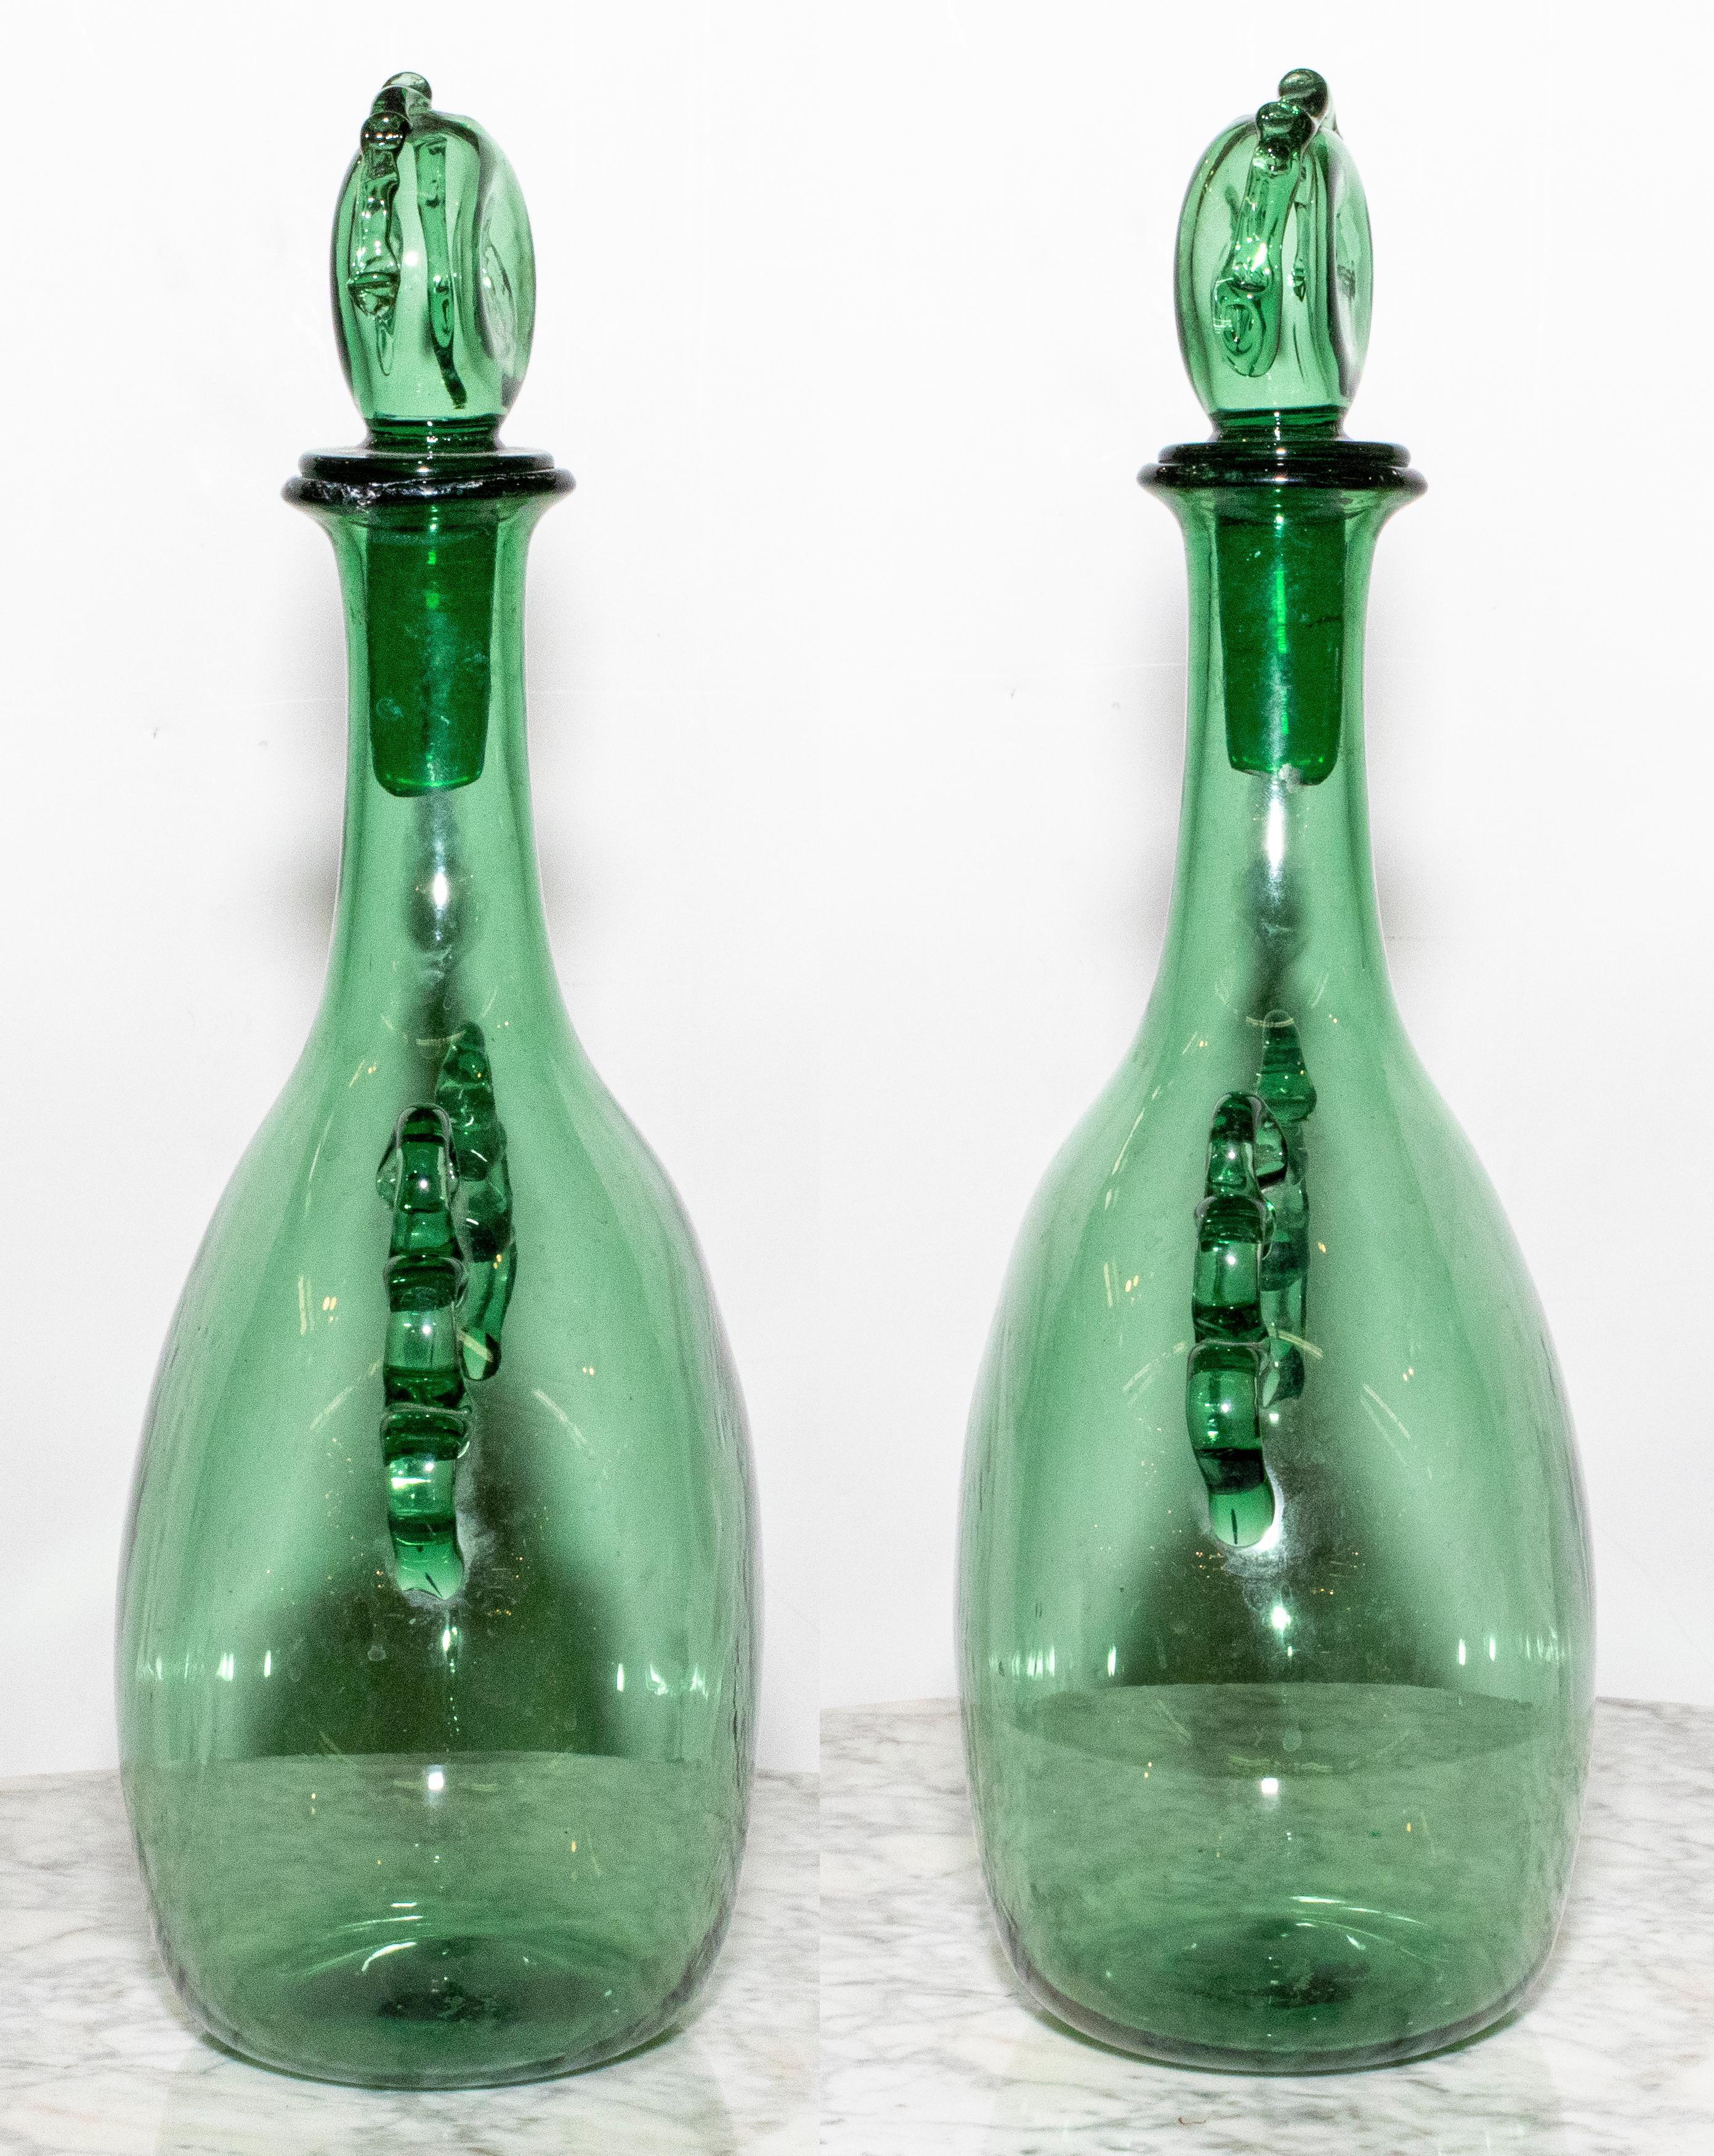 Pair of 1970s Blenko green glass decanters with elaborate decoration. Hand blown with elaborate stoppers.